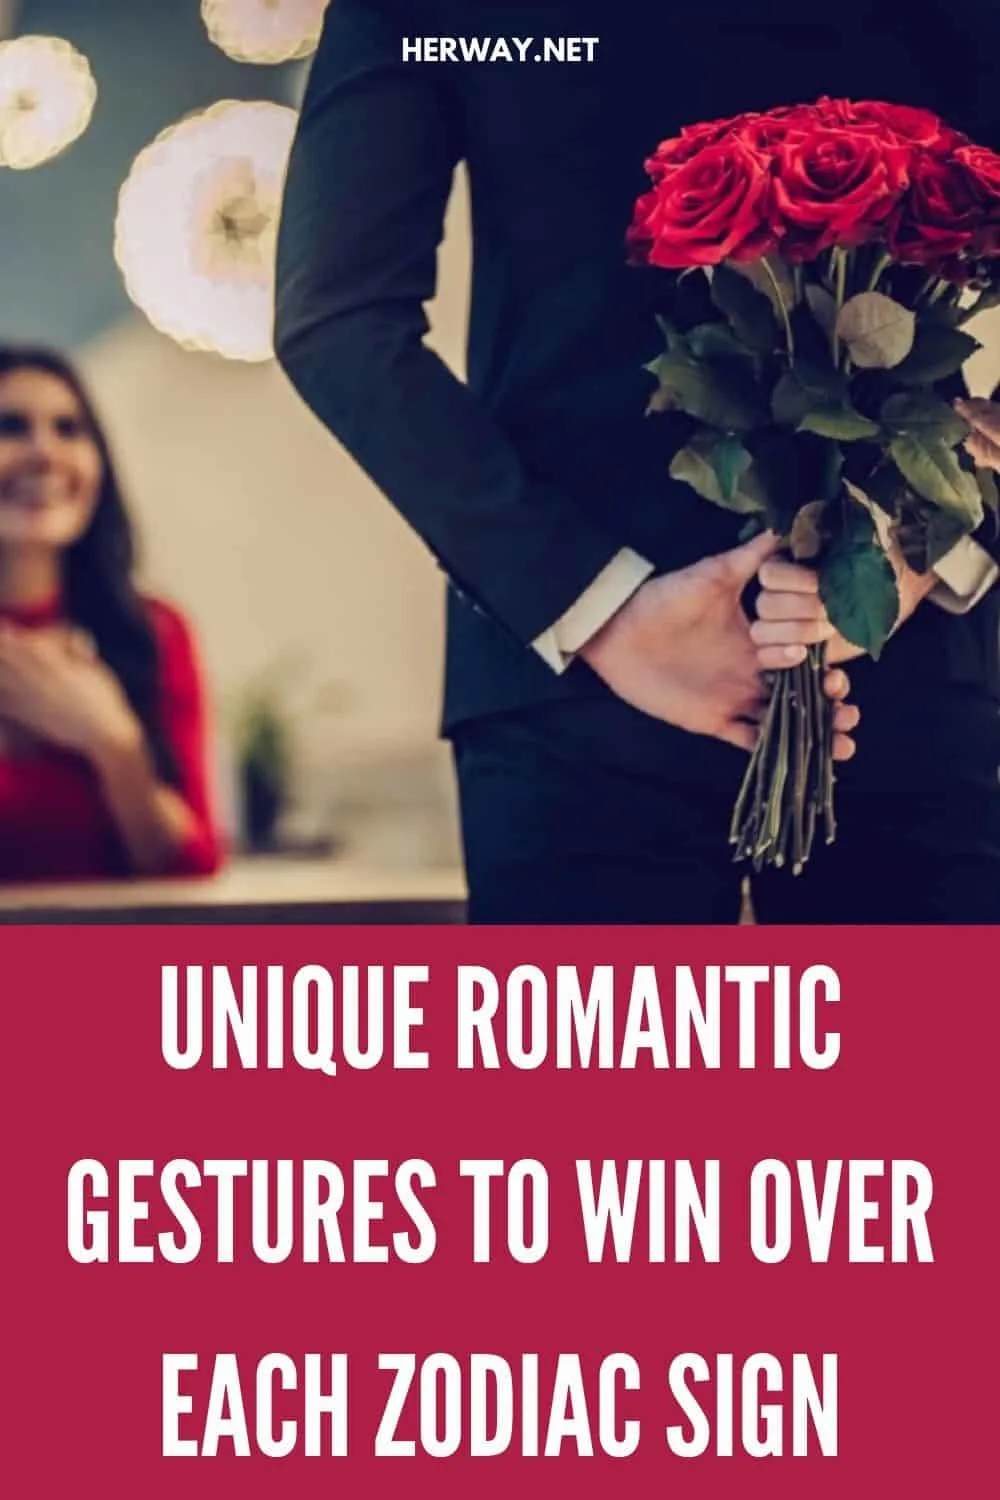 Unique Romantic Gestures To Win Over Each Zodiac Sign